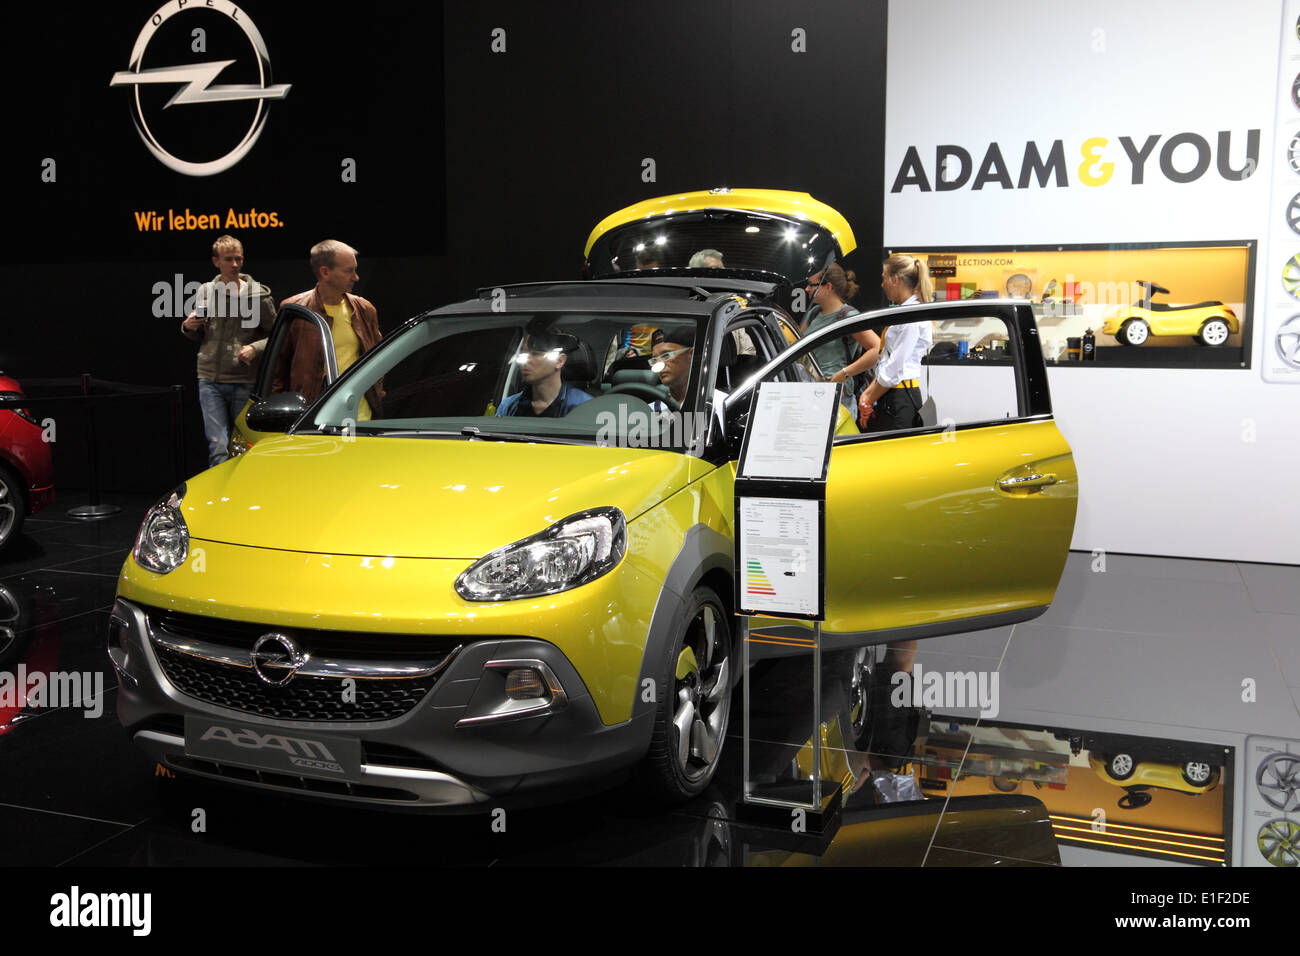 Opel Adam Rocks Compact Car at the AMI - Auto Mobile International Trade Fair on June 1st, 2014 in Le Stock Photo